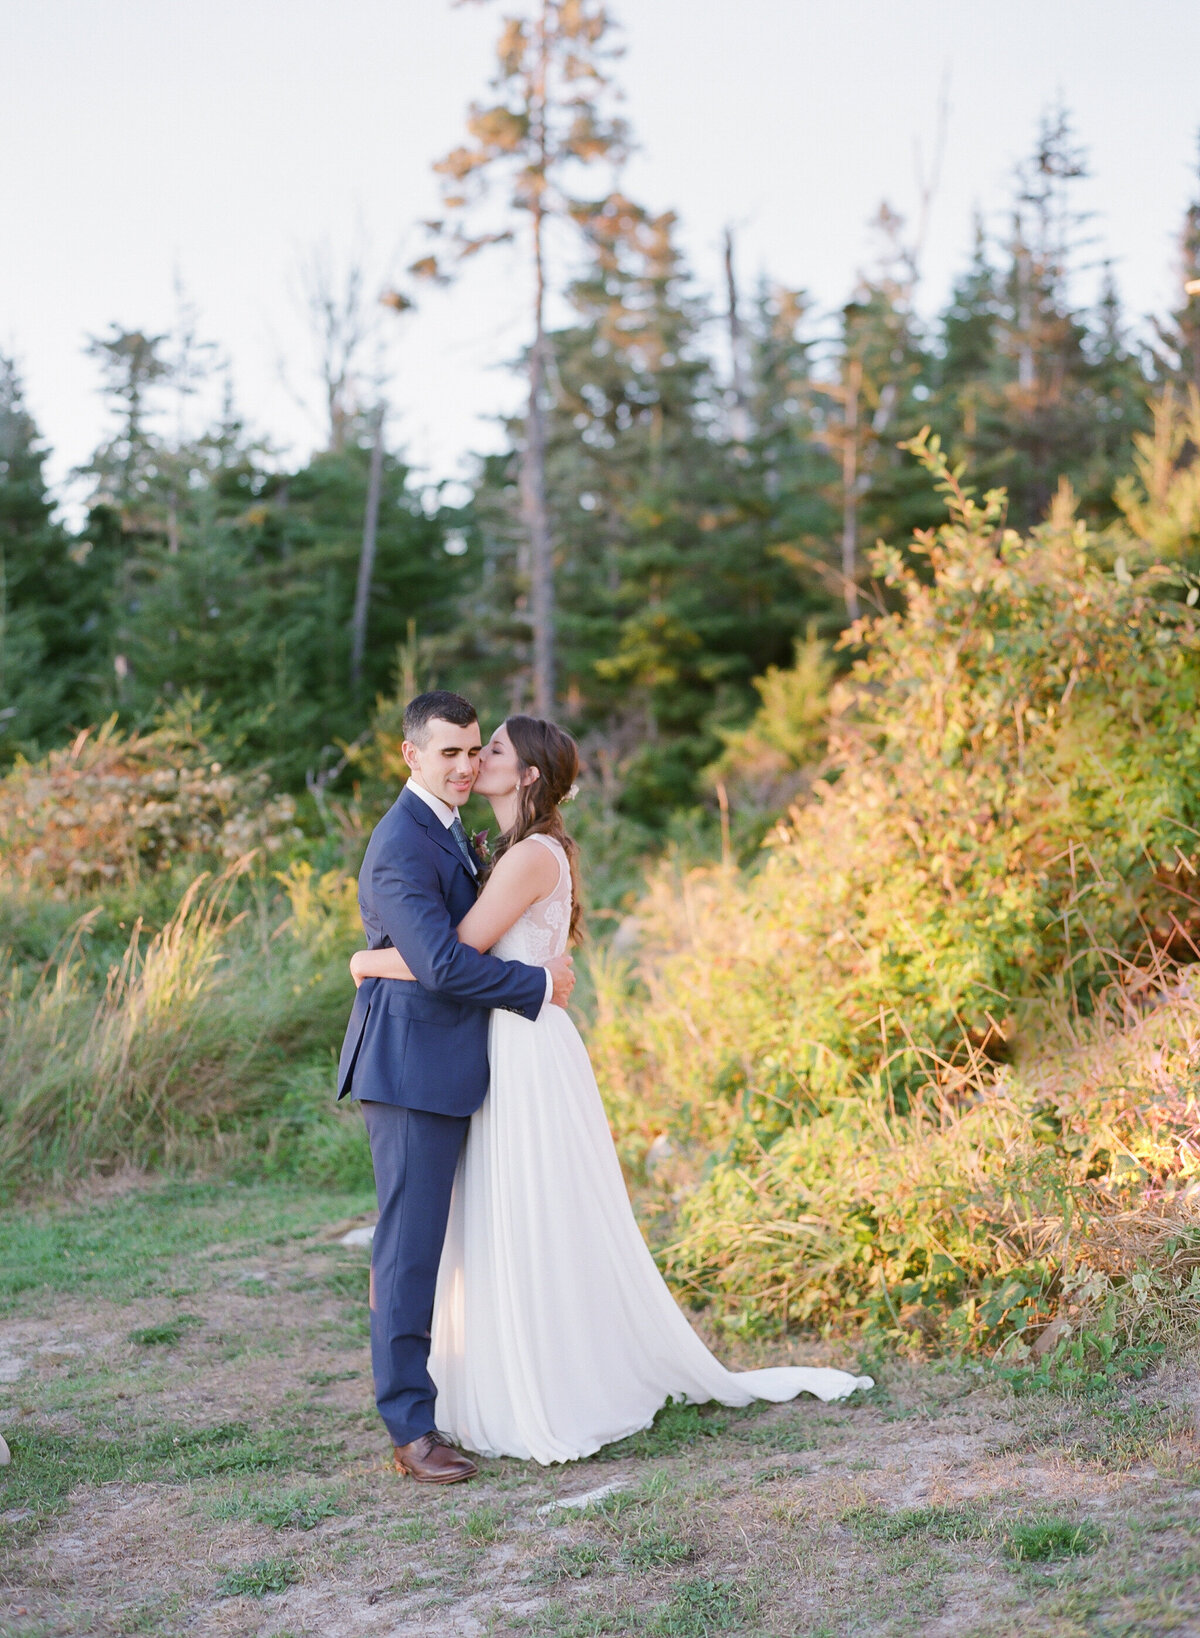 Jacqueline Anne Photography - Halifax Wedding Photographer - Jaclyn and Morgan-77